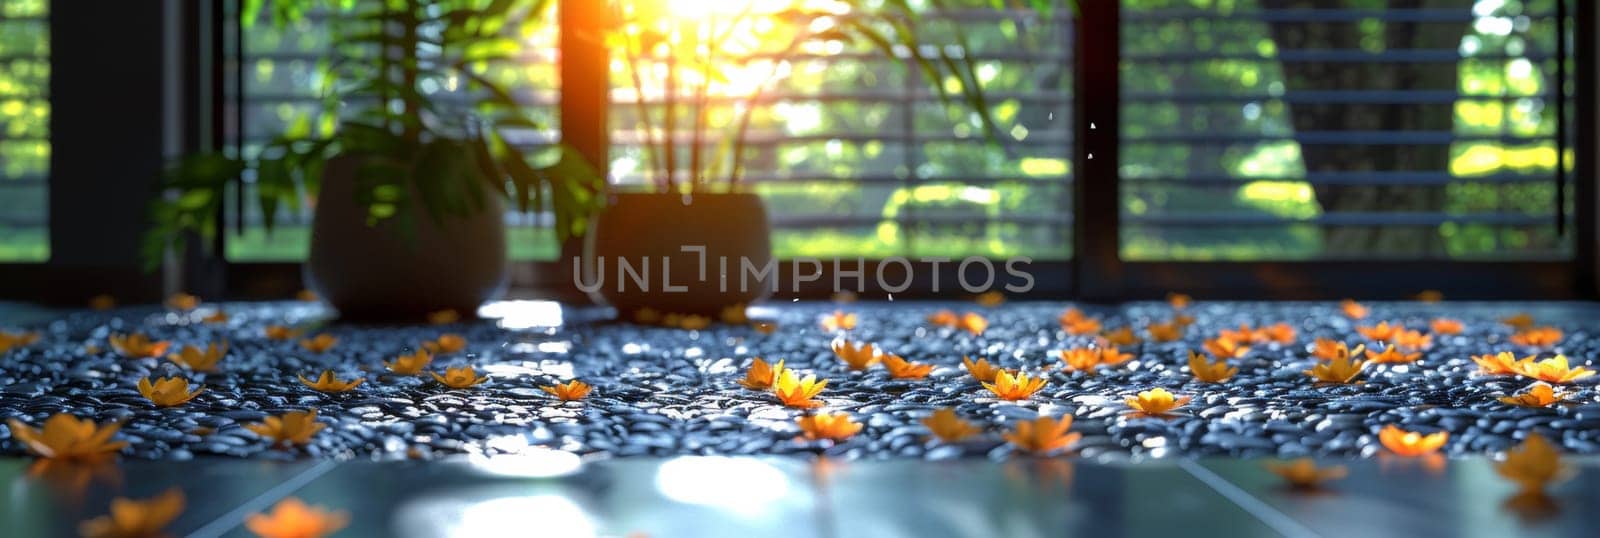 A potted plants on a floor with orange flowers and leaves, AI by starush